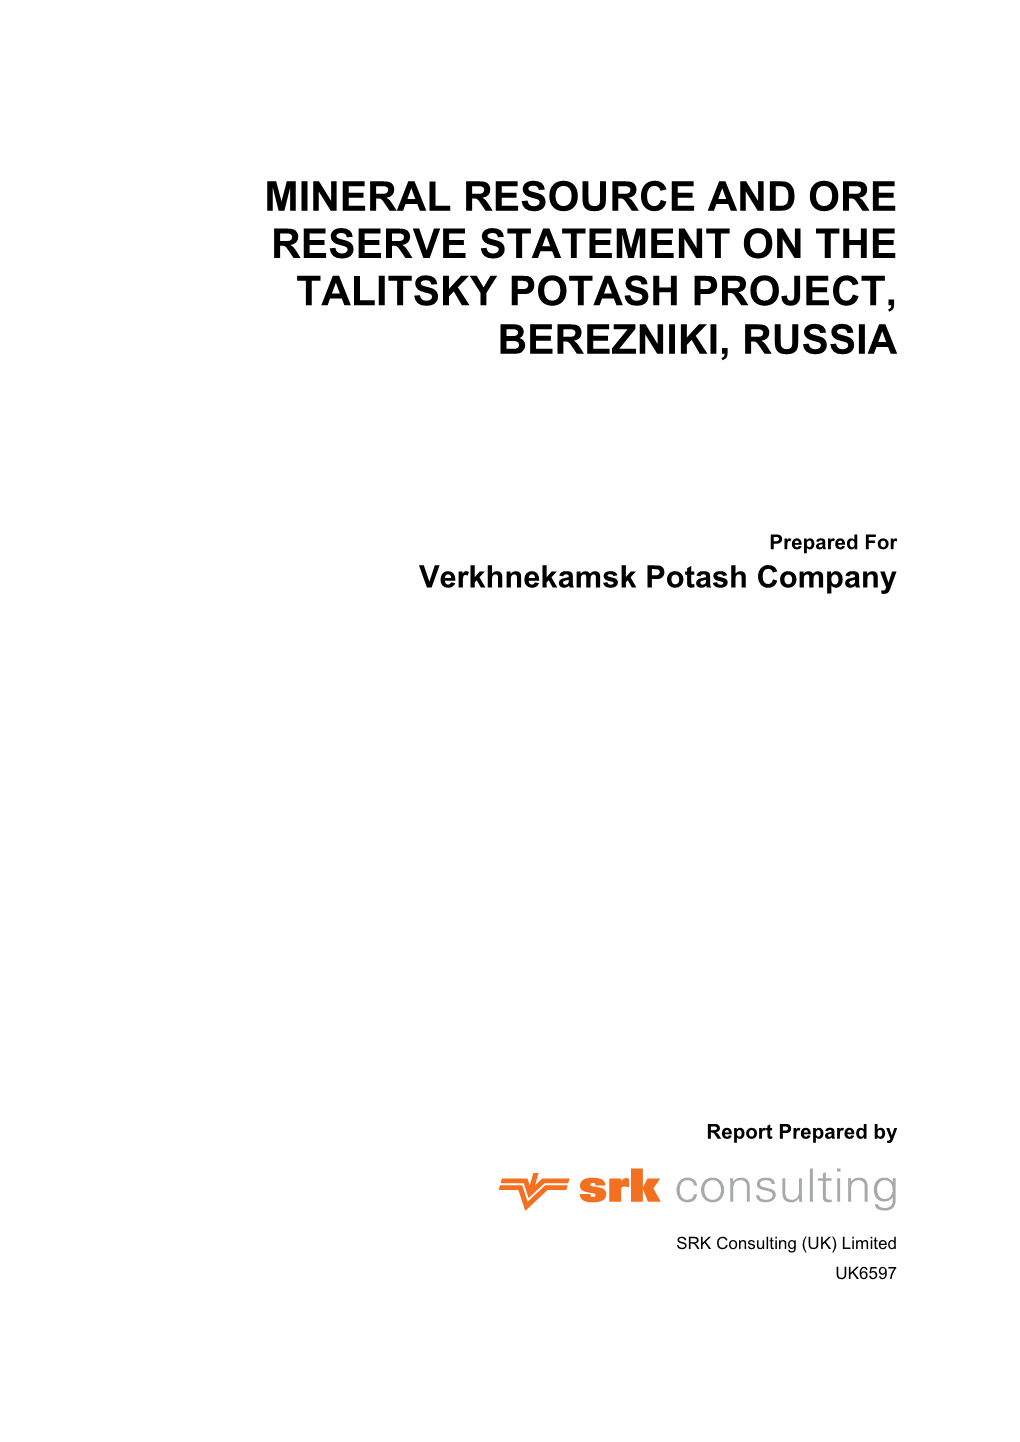 Mineral Resource and Ore Reserve Statement on the Talitsky Potash Project, Berezniki,Russia